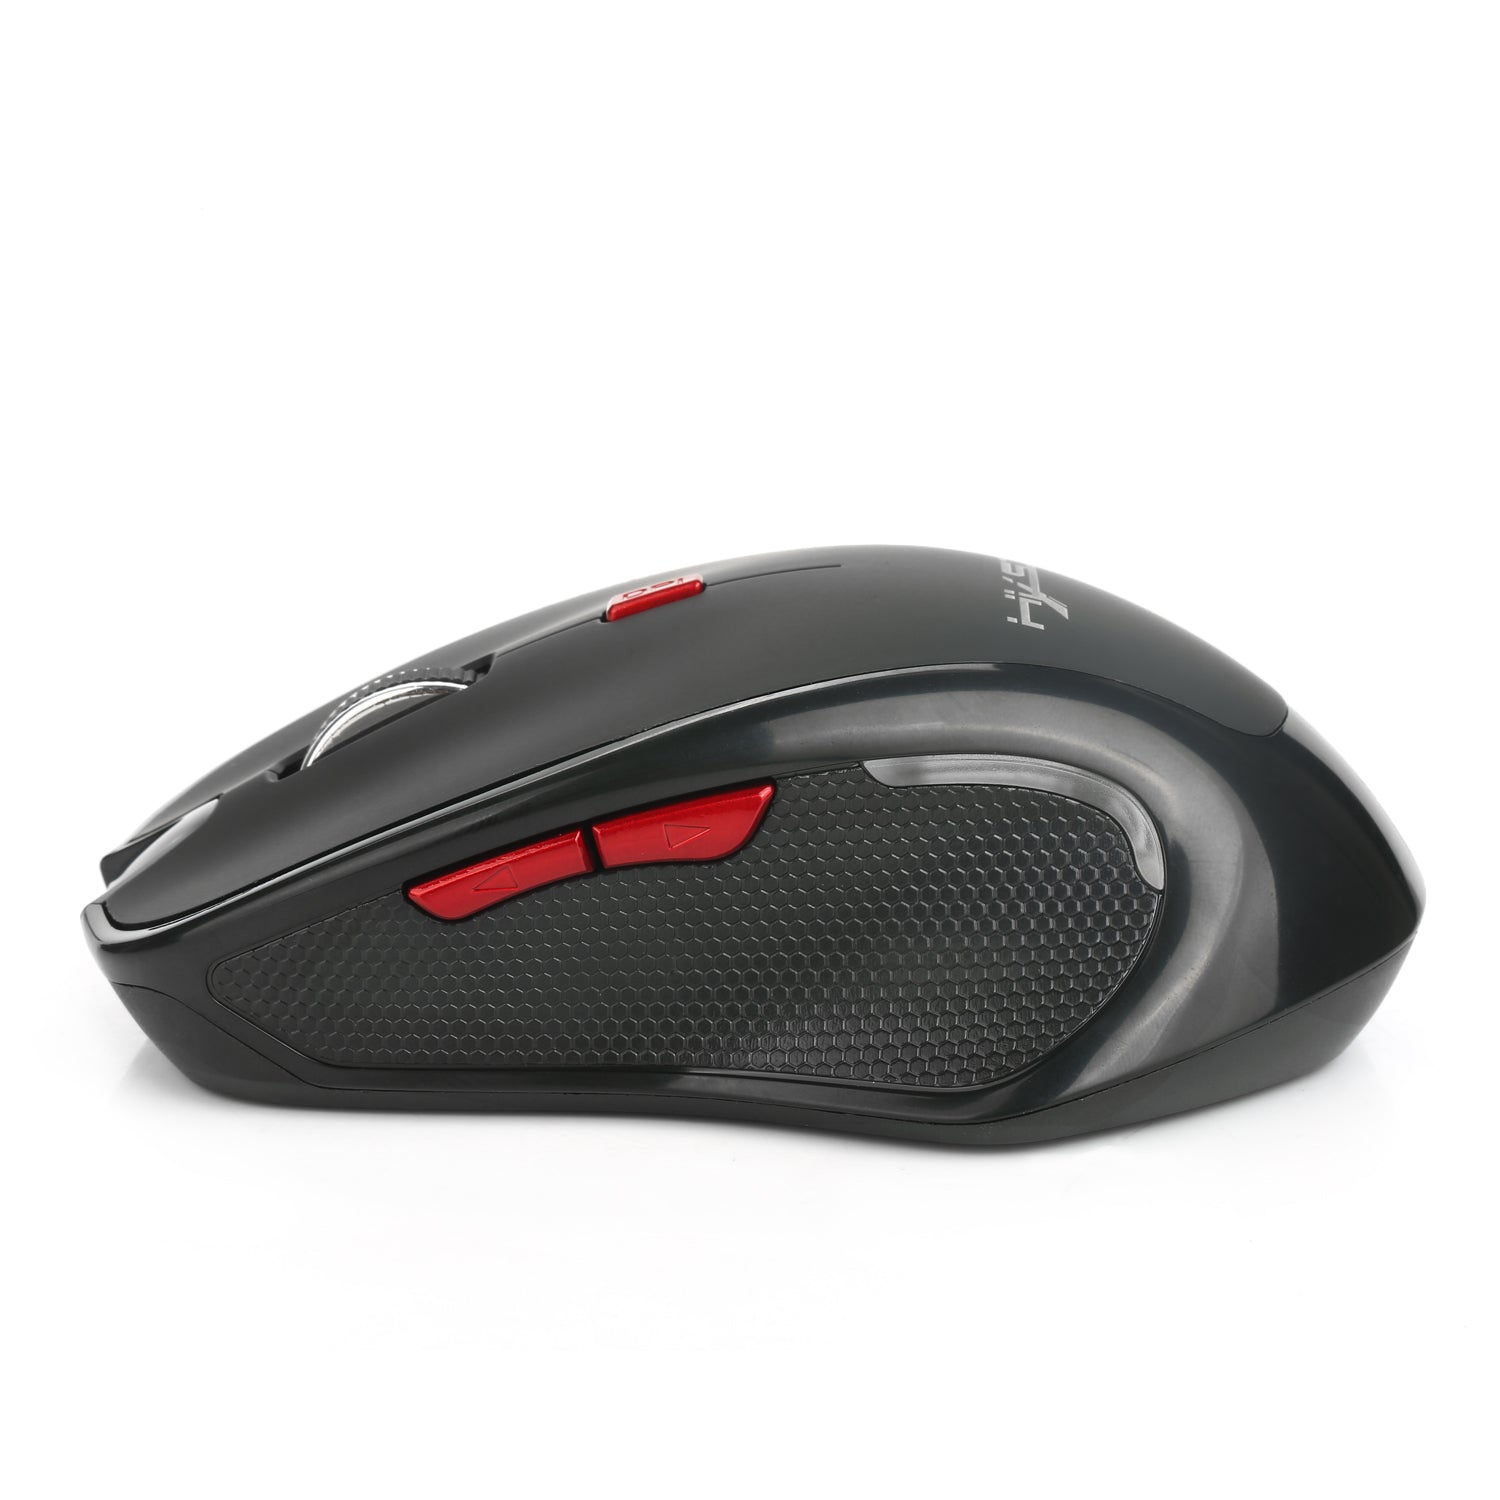 HXSJ T21 Wireless bluetooth 3.0 Mouse 6 Button 4 Adjustable DPI Up To 2400dpi Gaming Mice